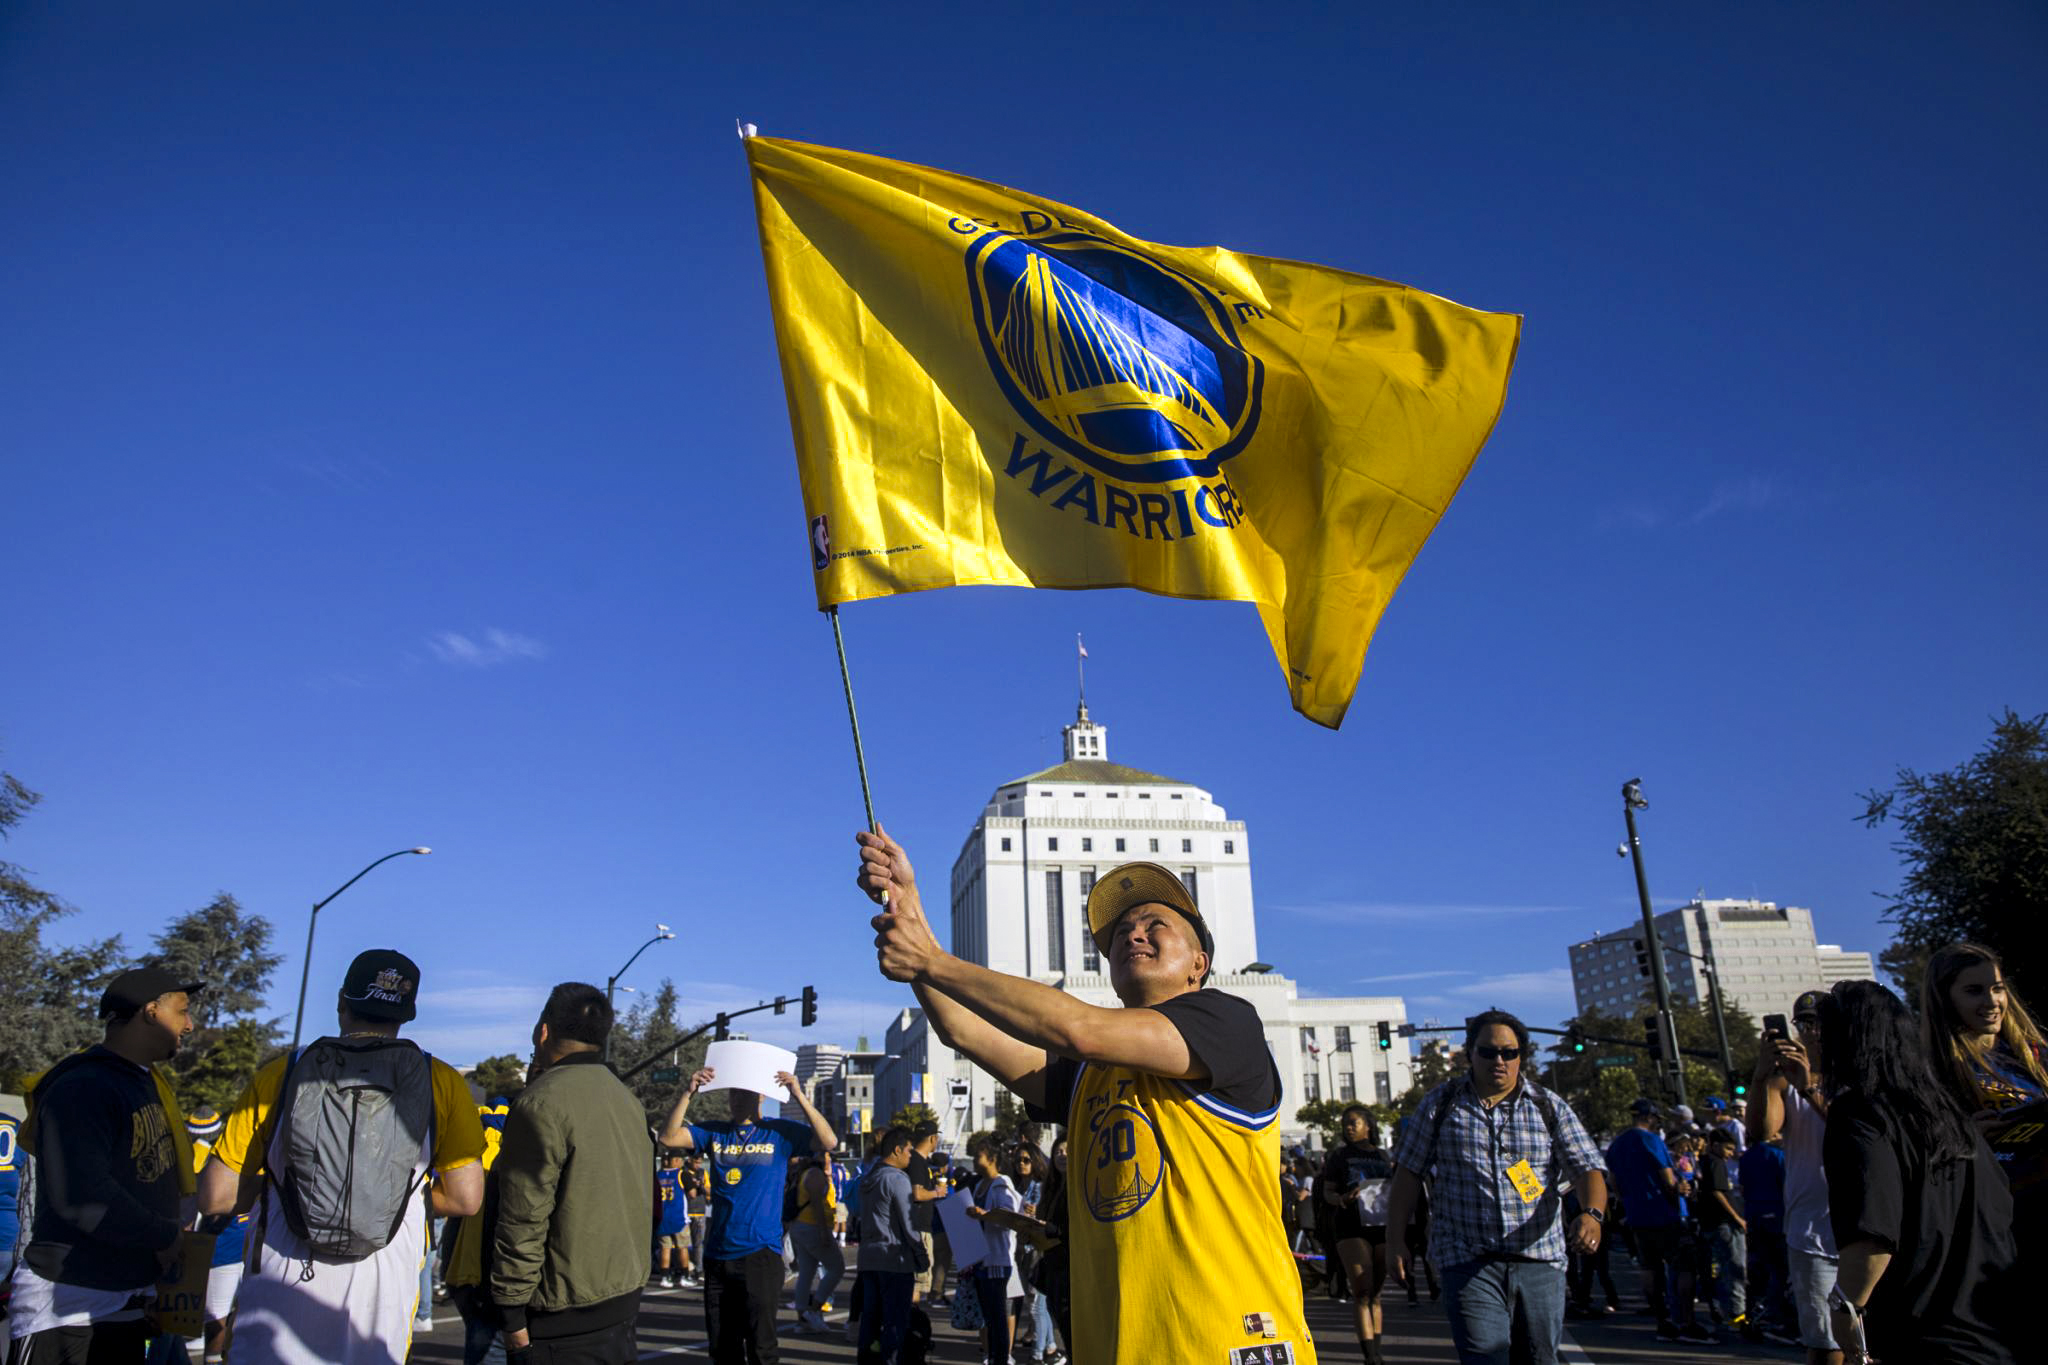 Fans line up for Golden State Warriors NBA championship parade